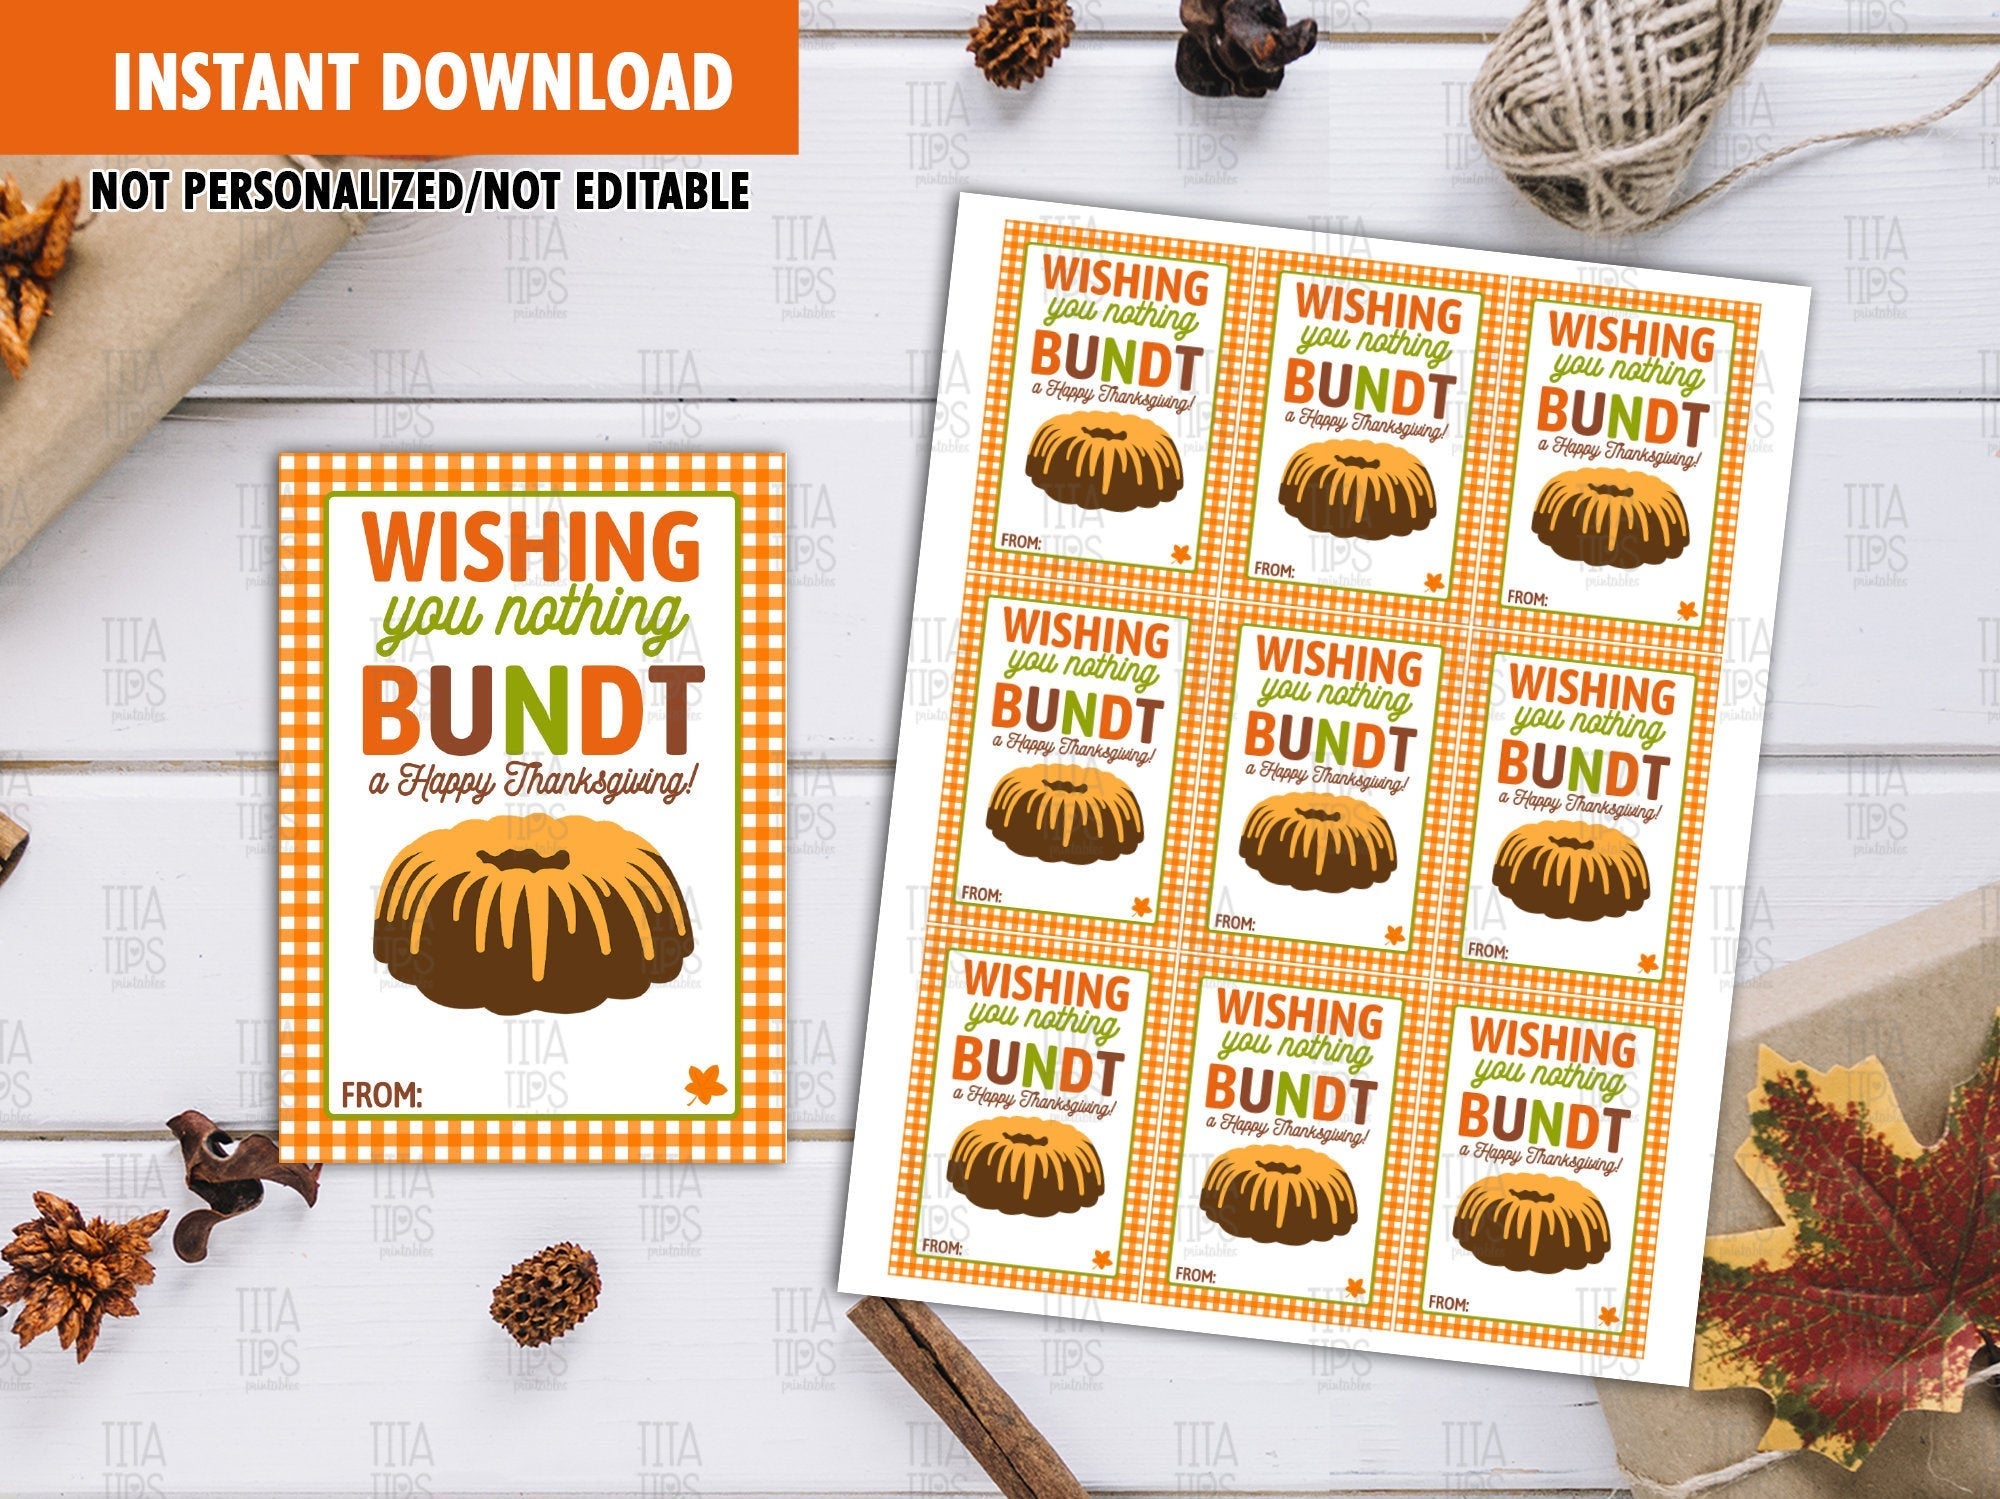 wishing-you-nothing-bundt-a-happy-thanksgiving-favor-tags-bundt-cake